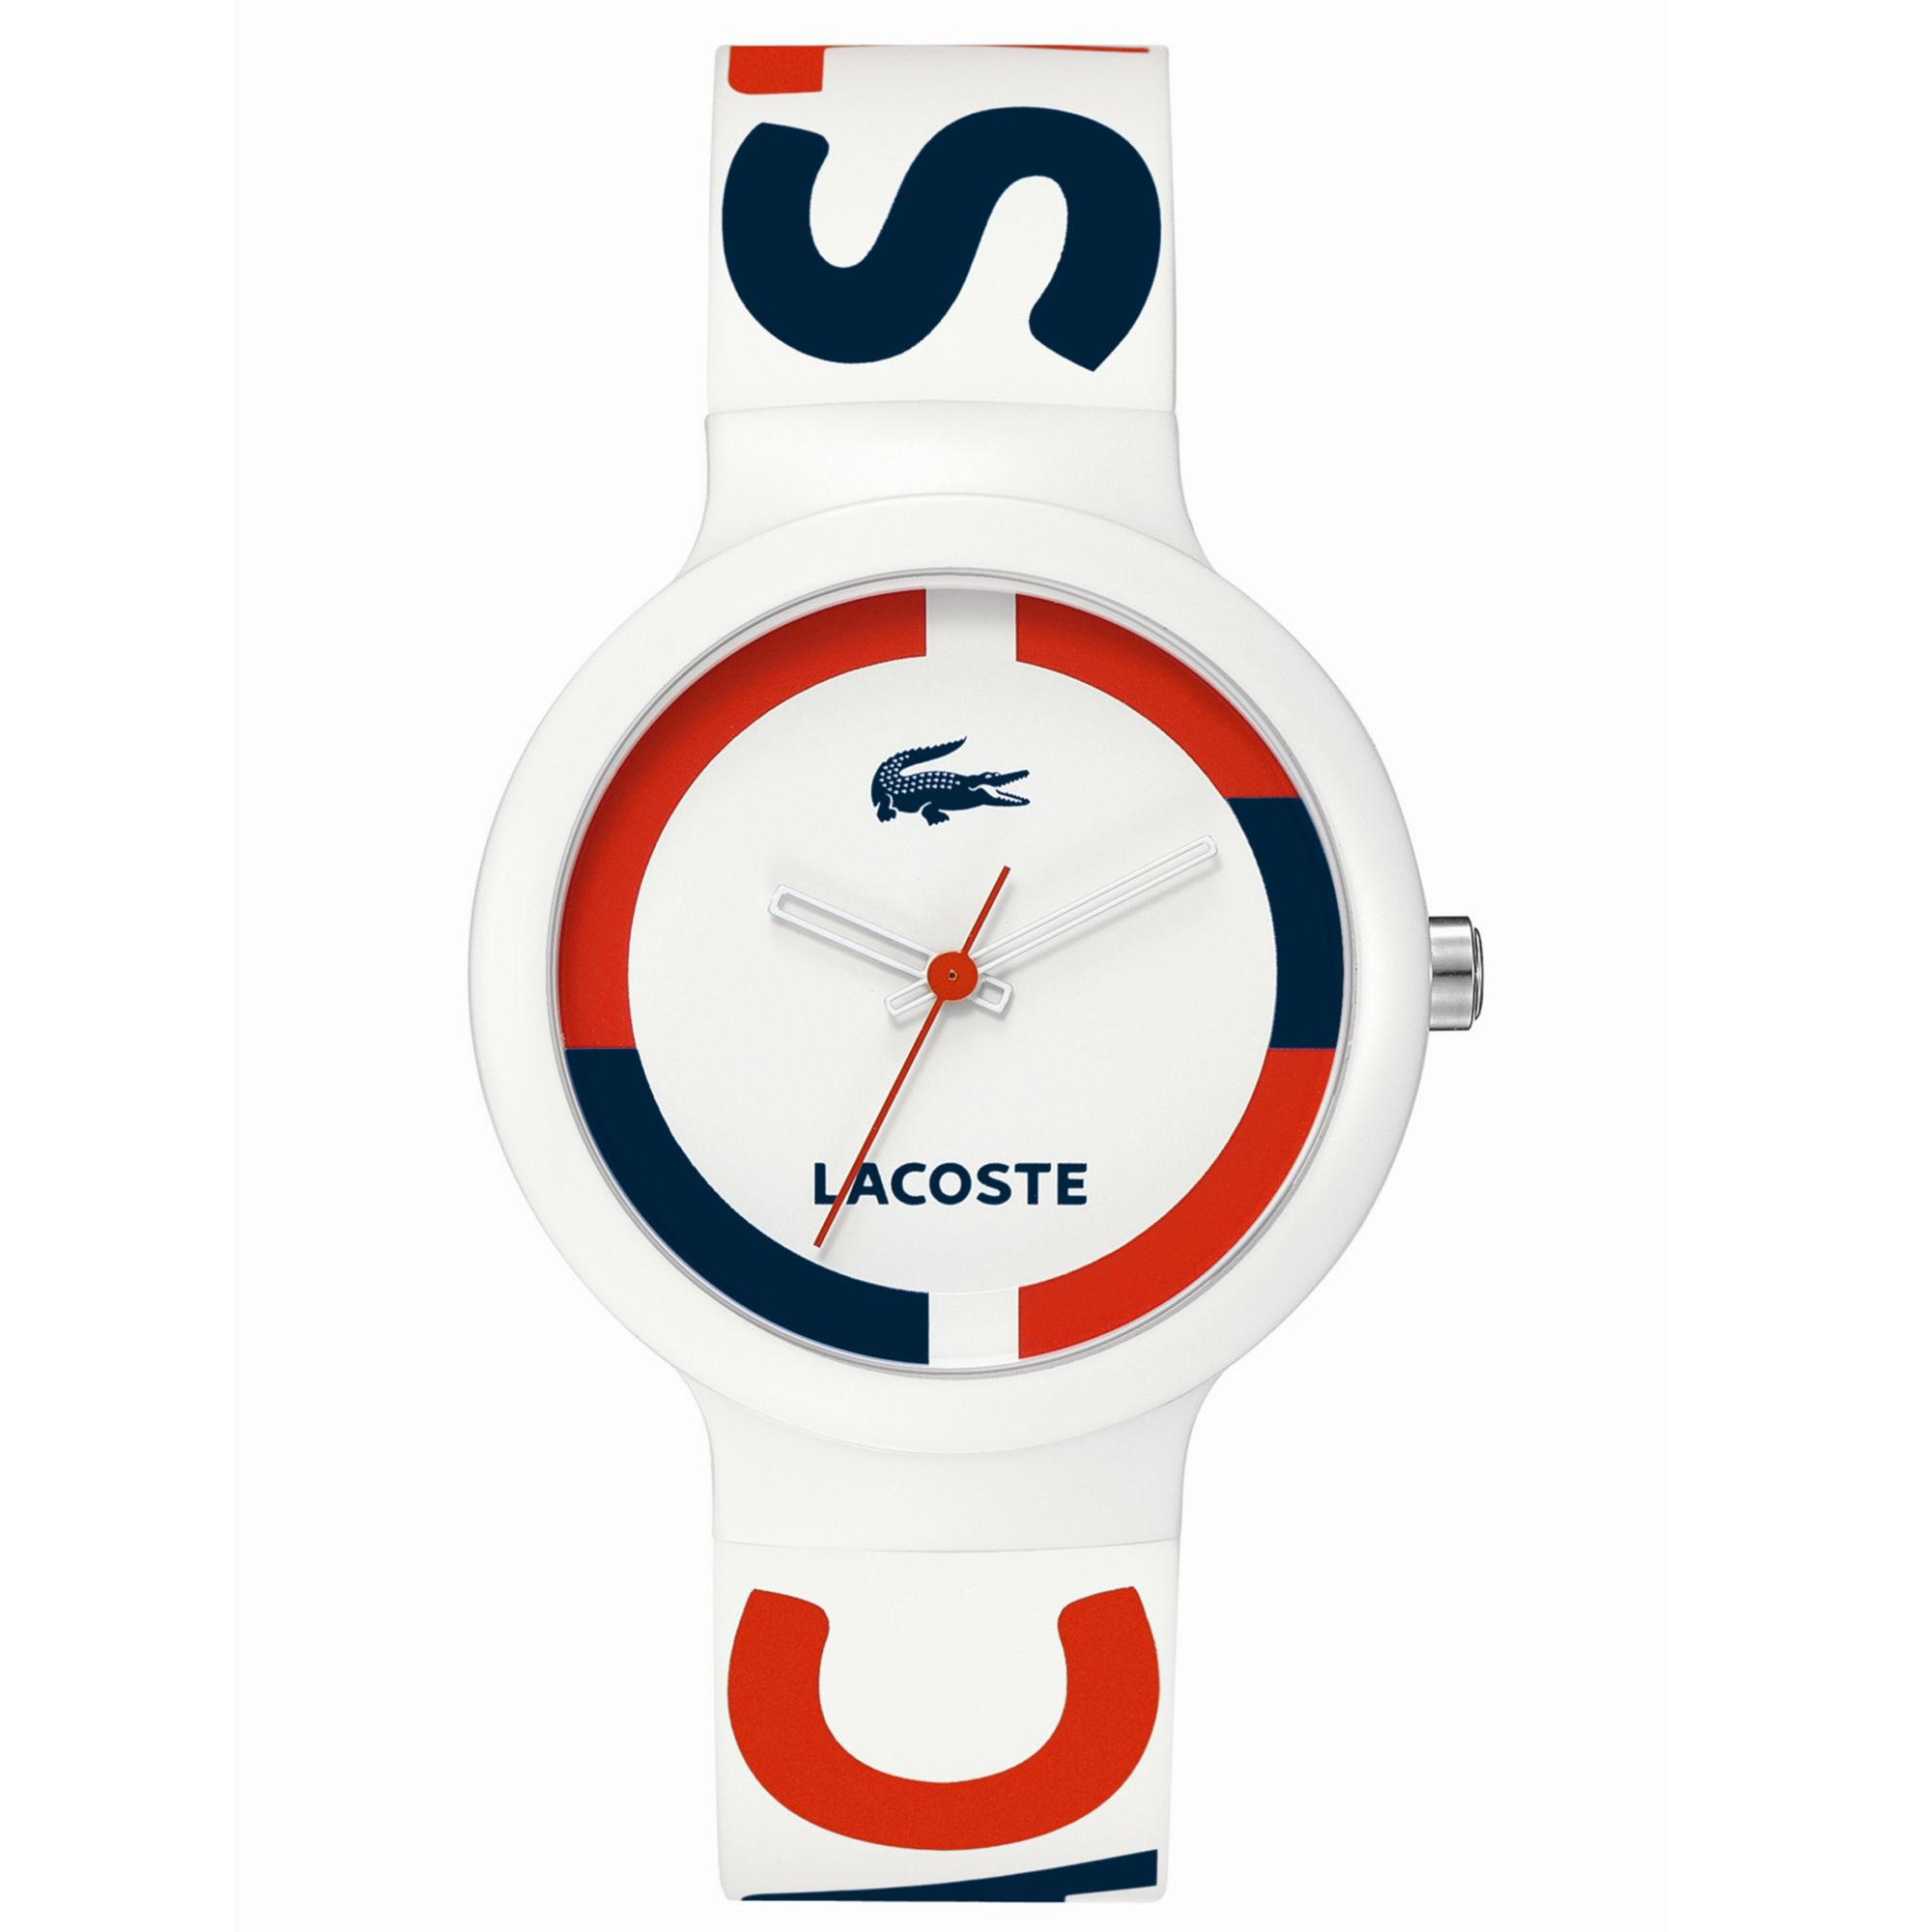 Vurdering skrubbe kontrollere Lacoste Watch Goa White Blue and Red Logo Silicone Strap for Men - Lyst